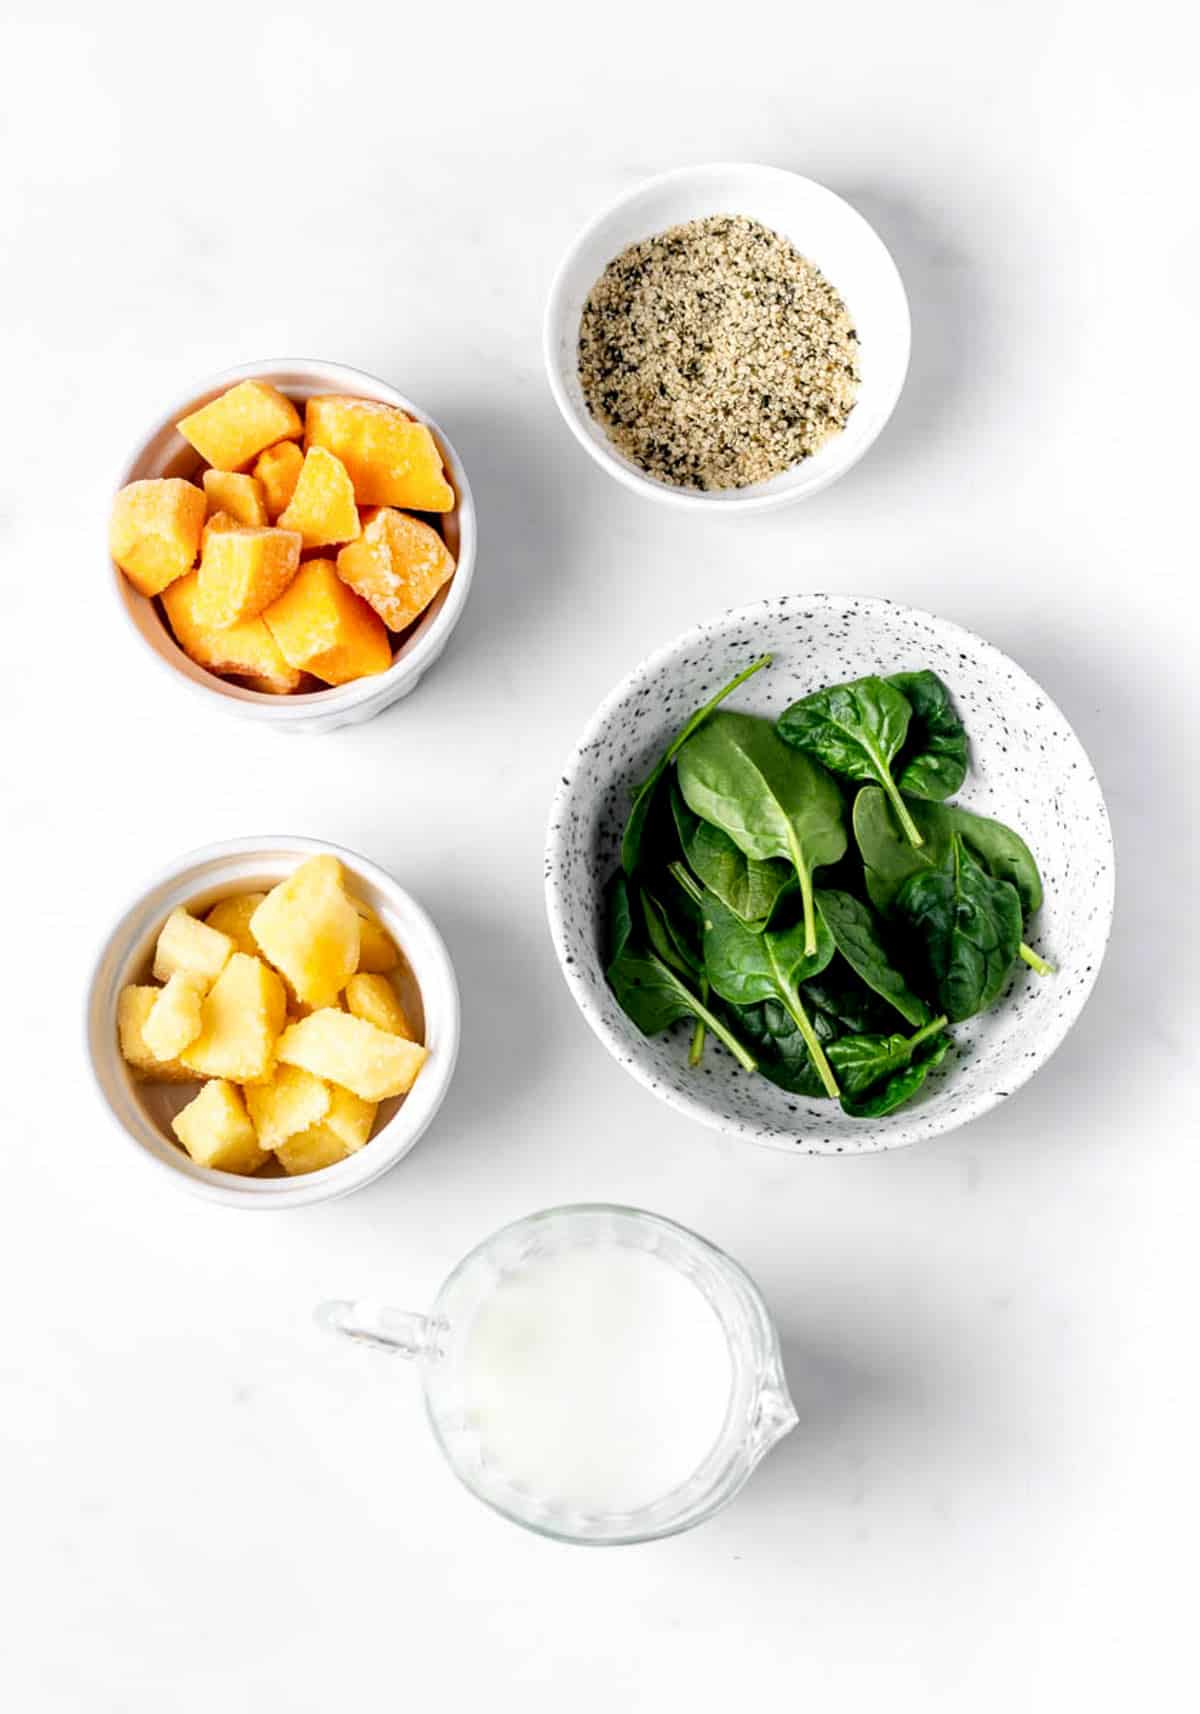 Ingredients to make a green smoothie without banana.